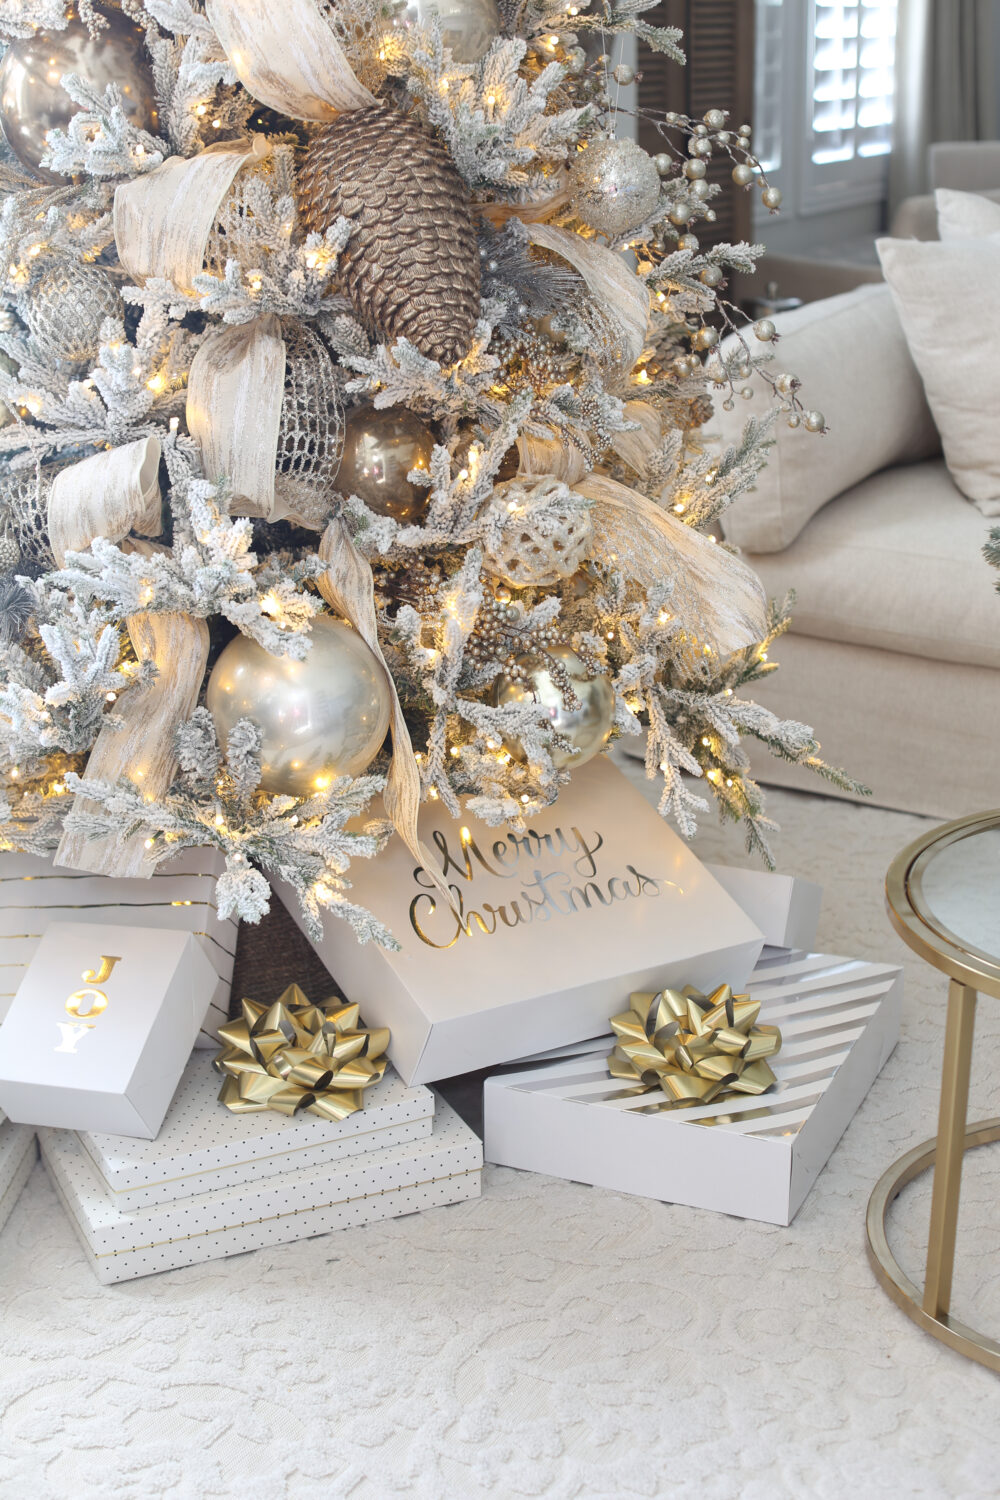 Christmas Tree Ideas and Decor Trends for 2022 - Decorator's Warehouse